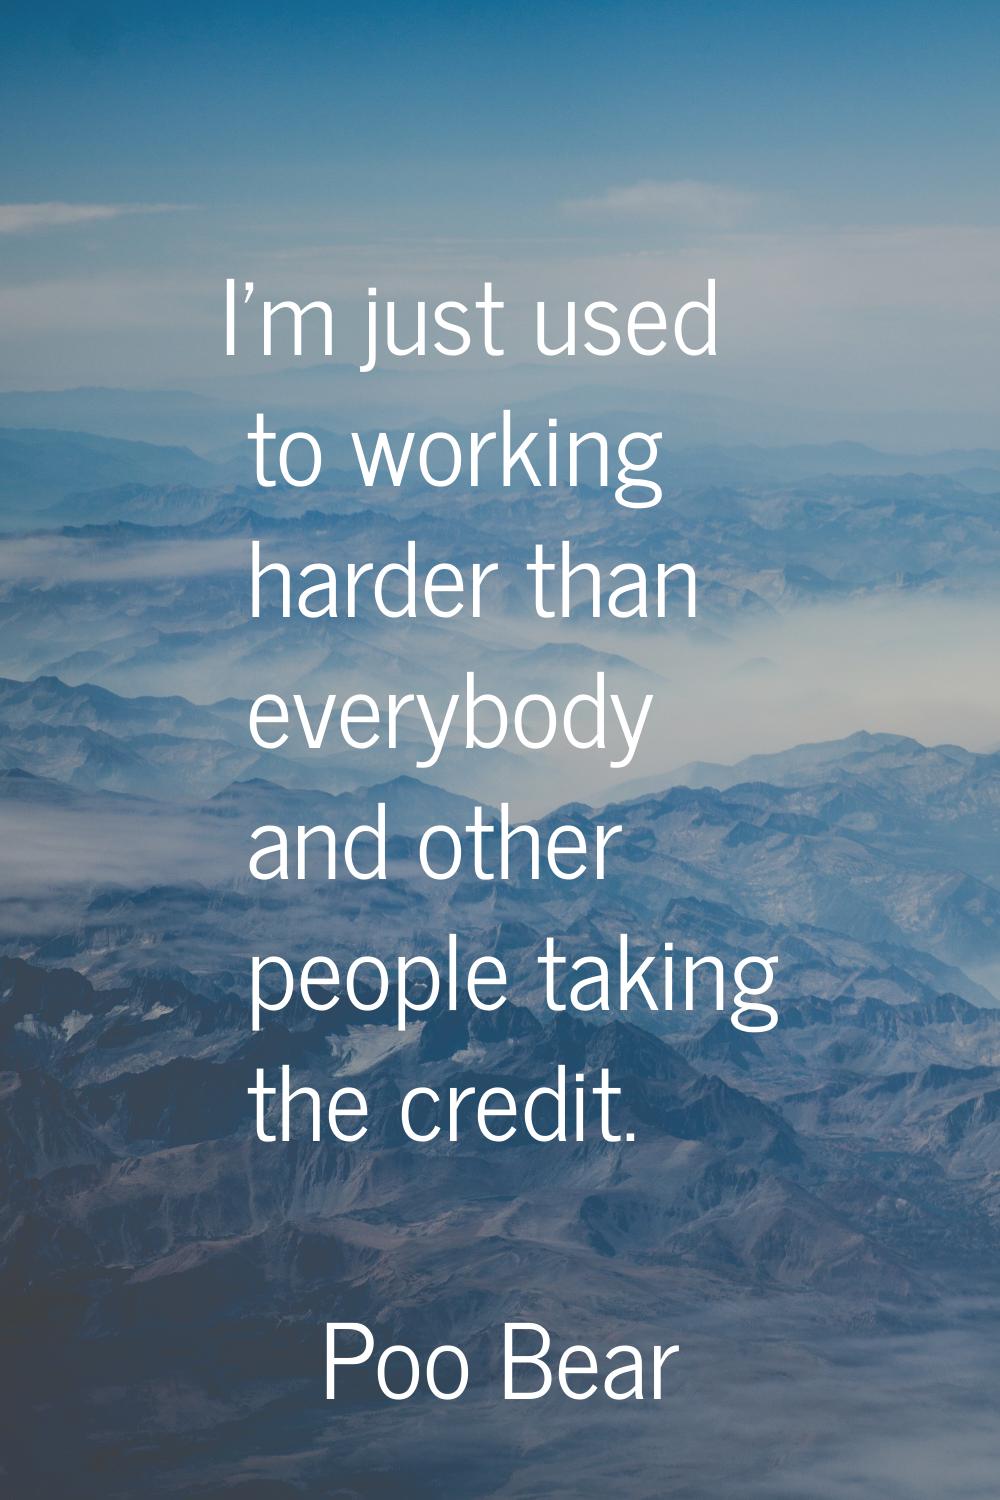 I'm just used to working harder than everybody and other people taking the credit.